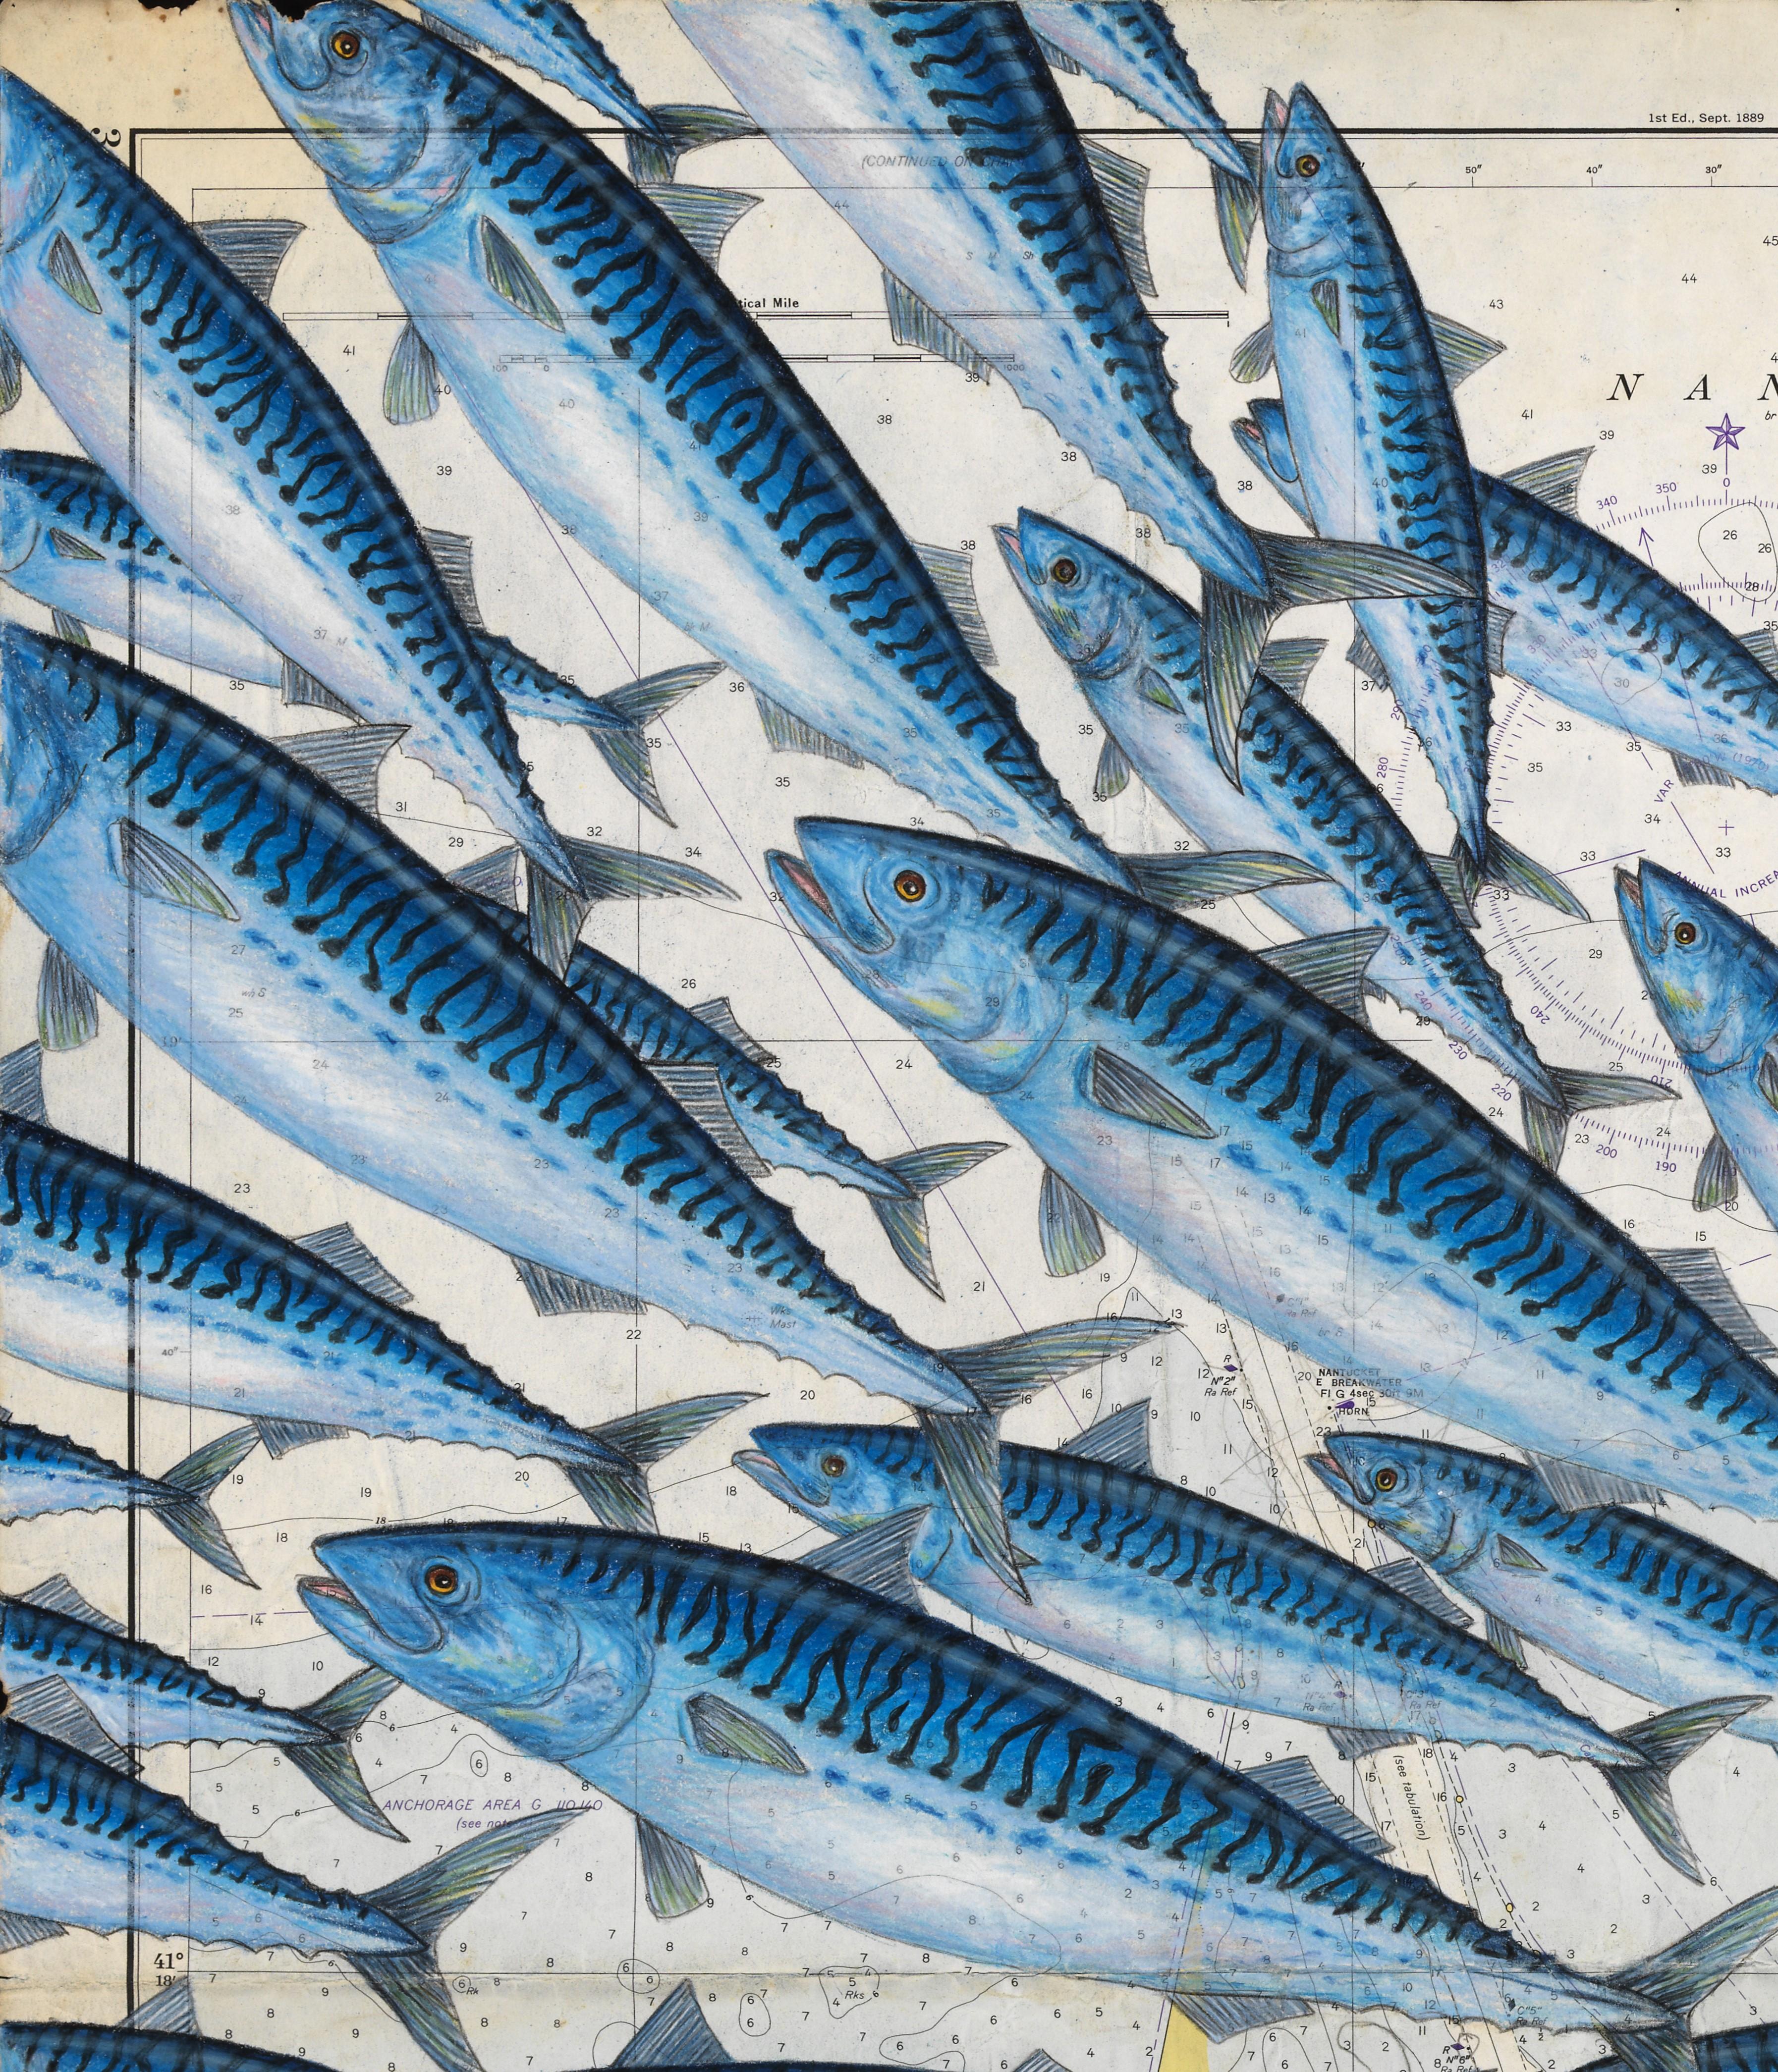 Nantucket Mack Pack - A Gathering of Mackerel on a Vintage Nautical Map - Painting by Jeff Conroy